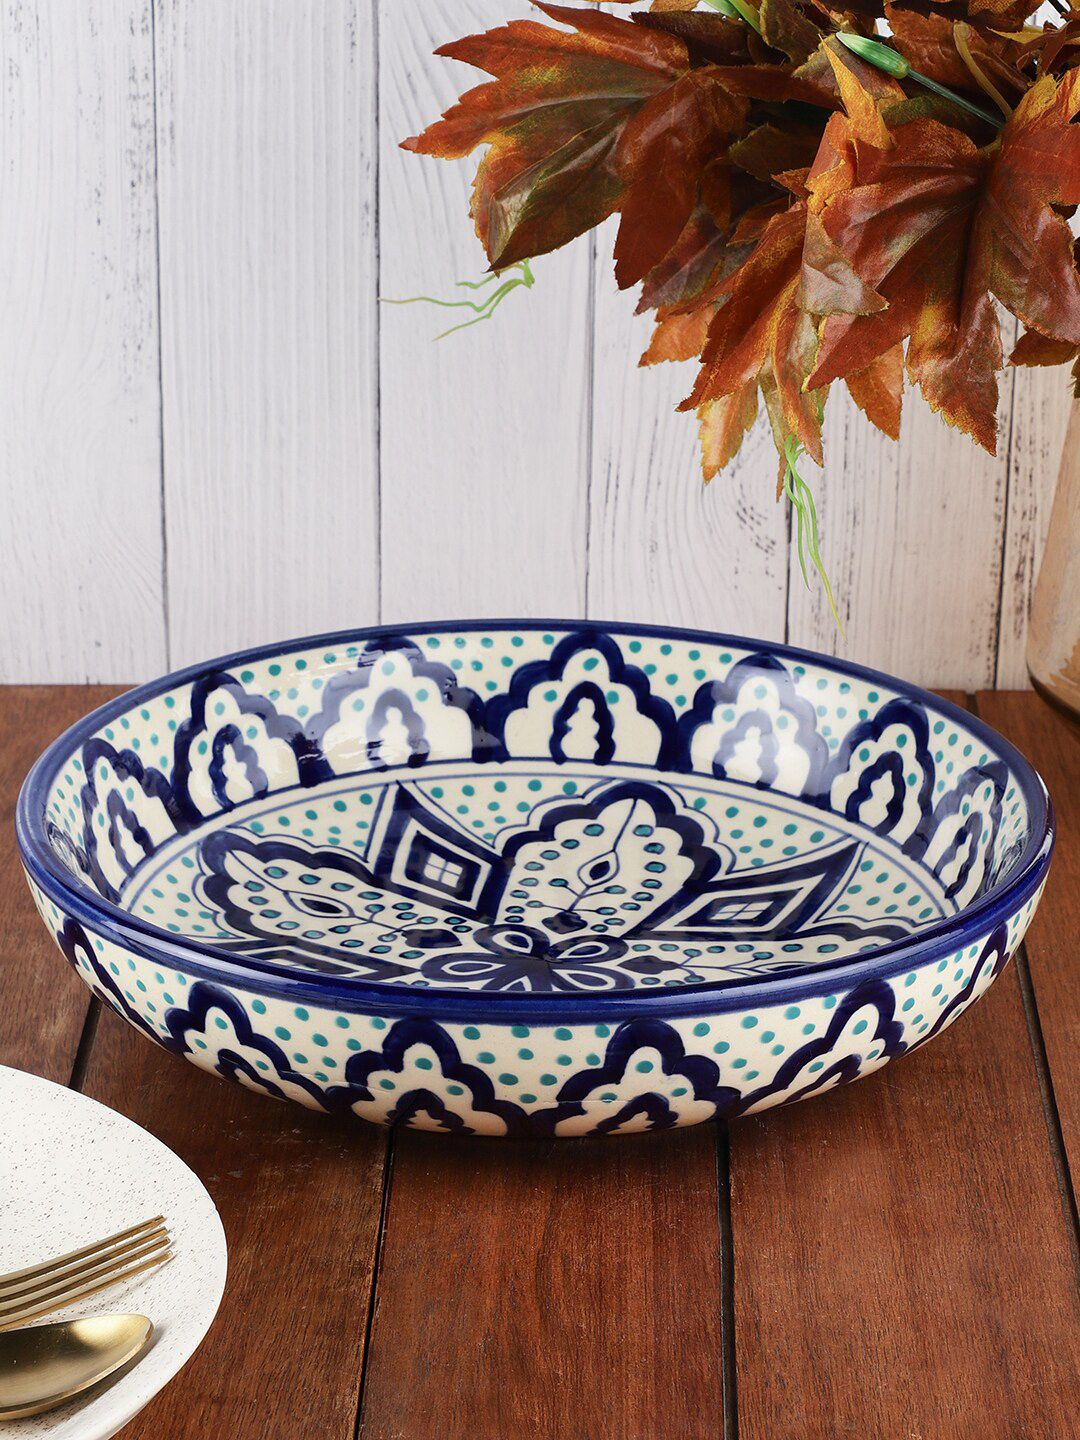 MIAH Decor Blue & White 1 Pieces Handcrafted and Hand Painted Printed Porcelain Glossy Bowls Price in India